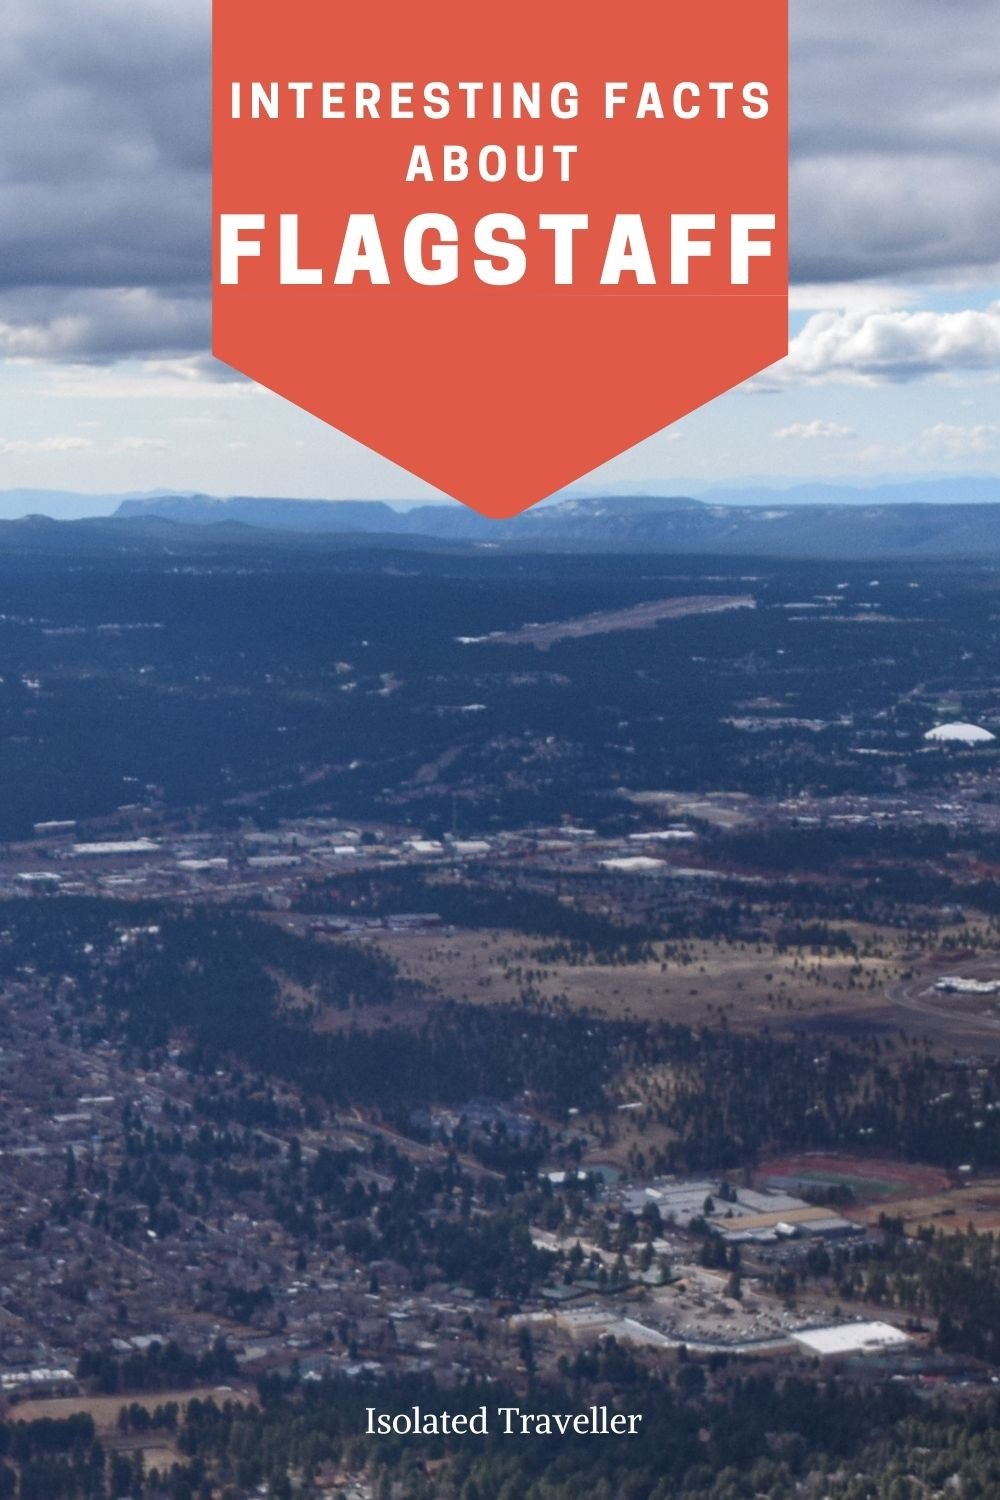 Facts About Flagstaff